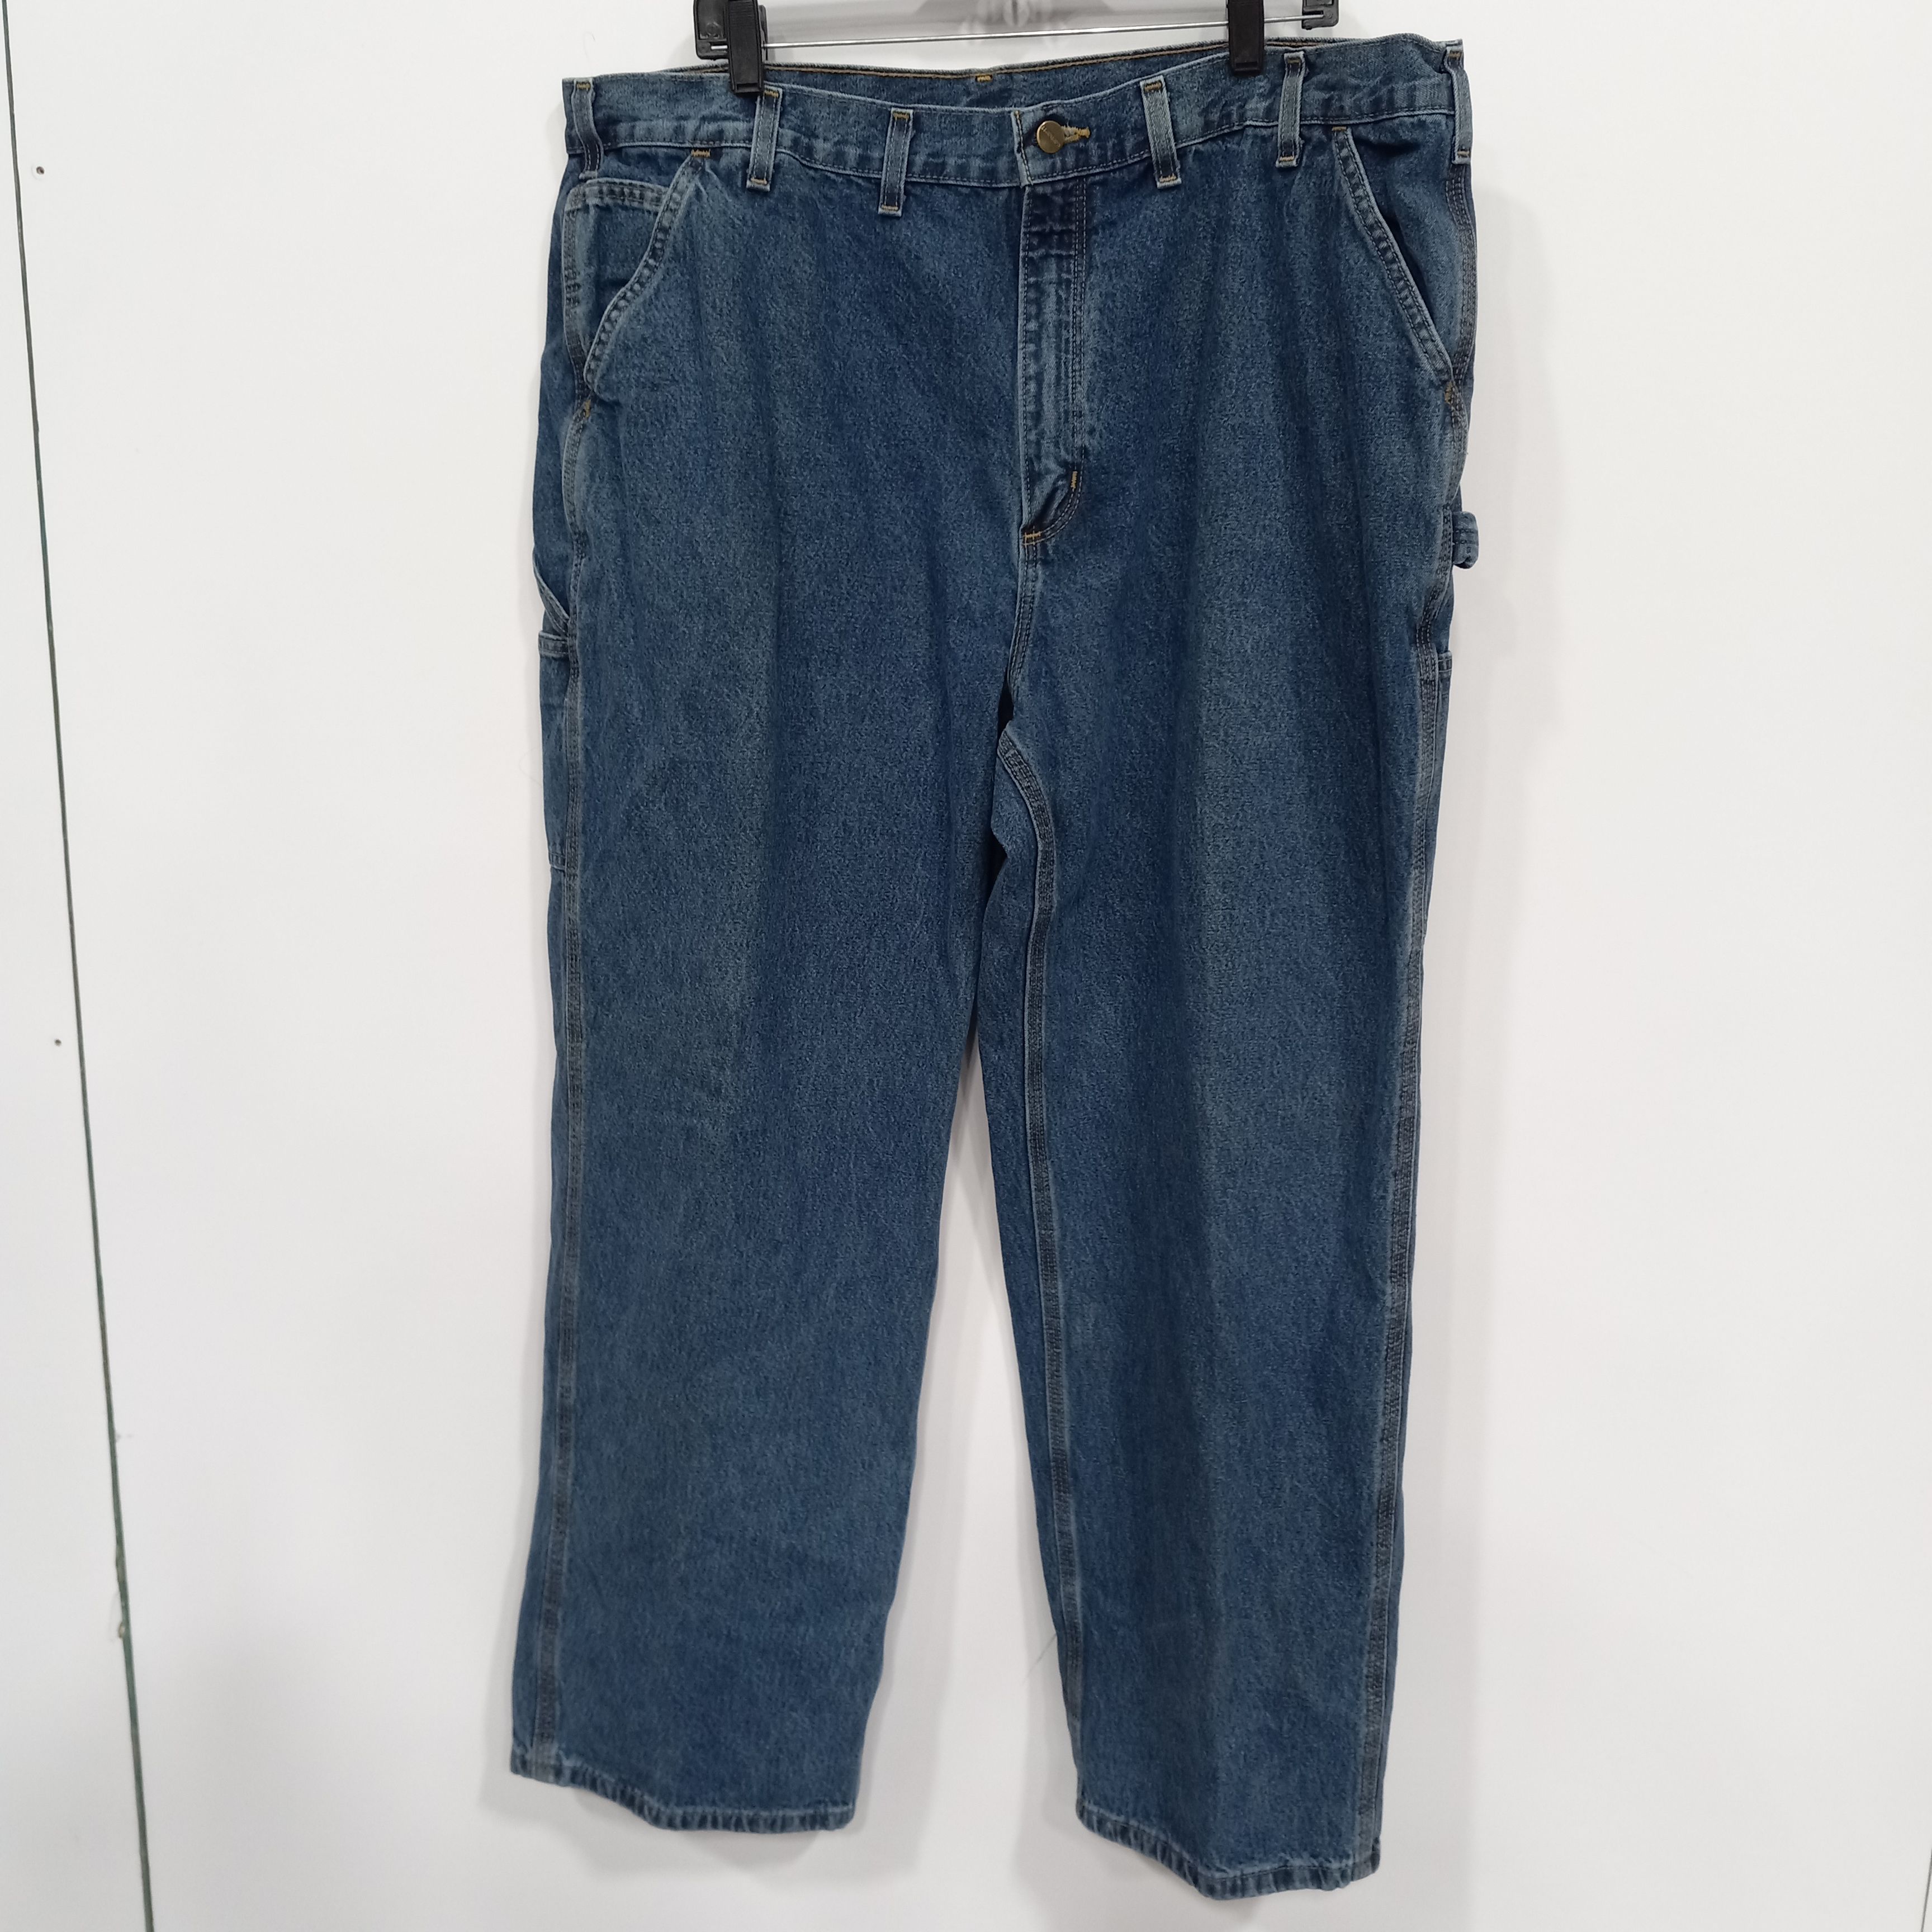 Buy the Men's Loose Original Fit Work Jeans Size 44x30 | GoodwillFinds